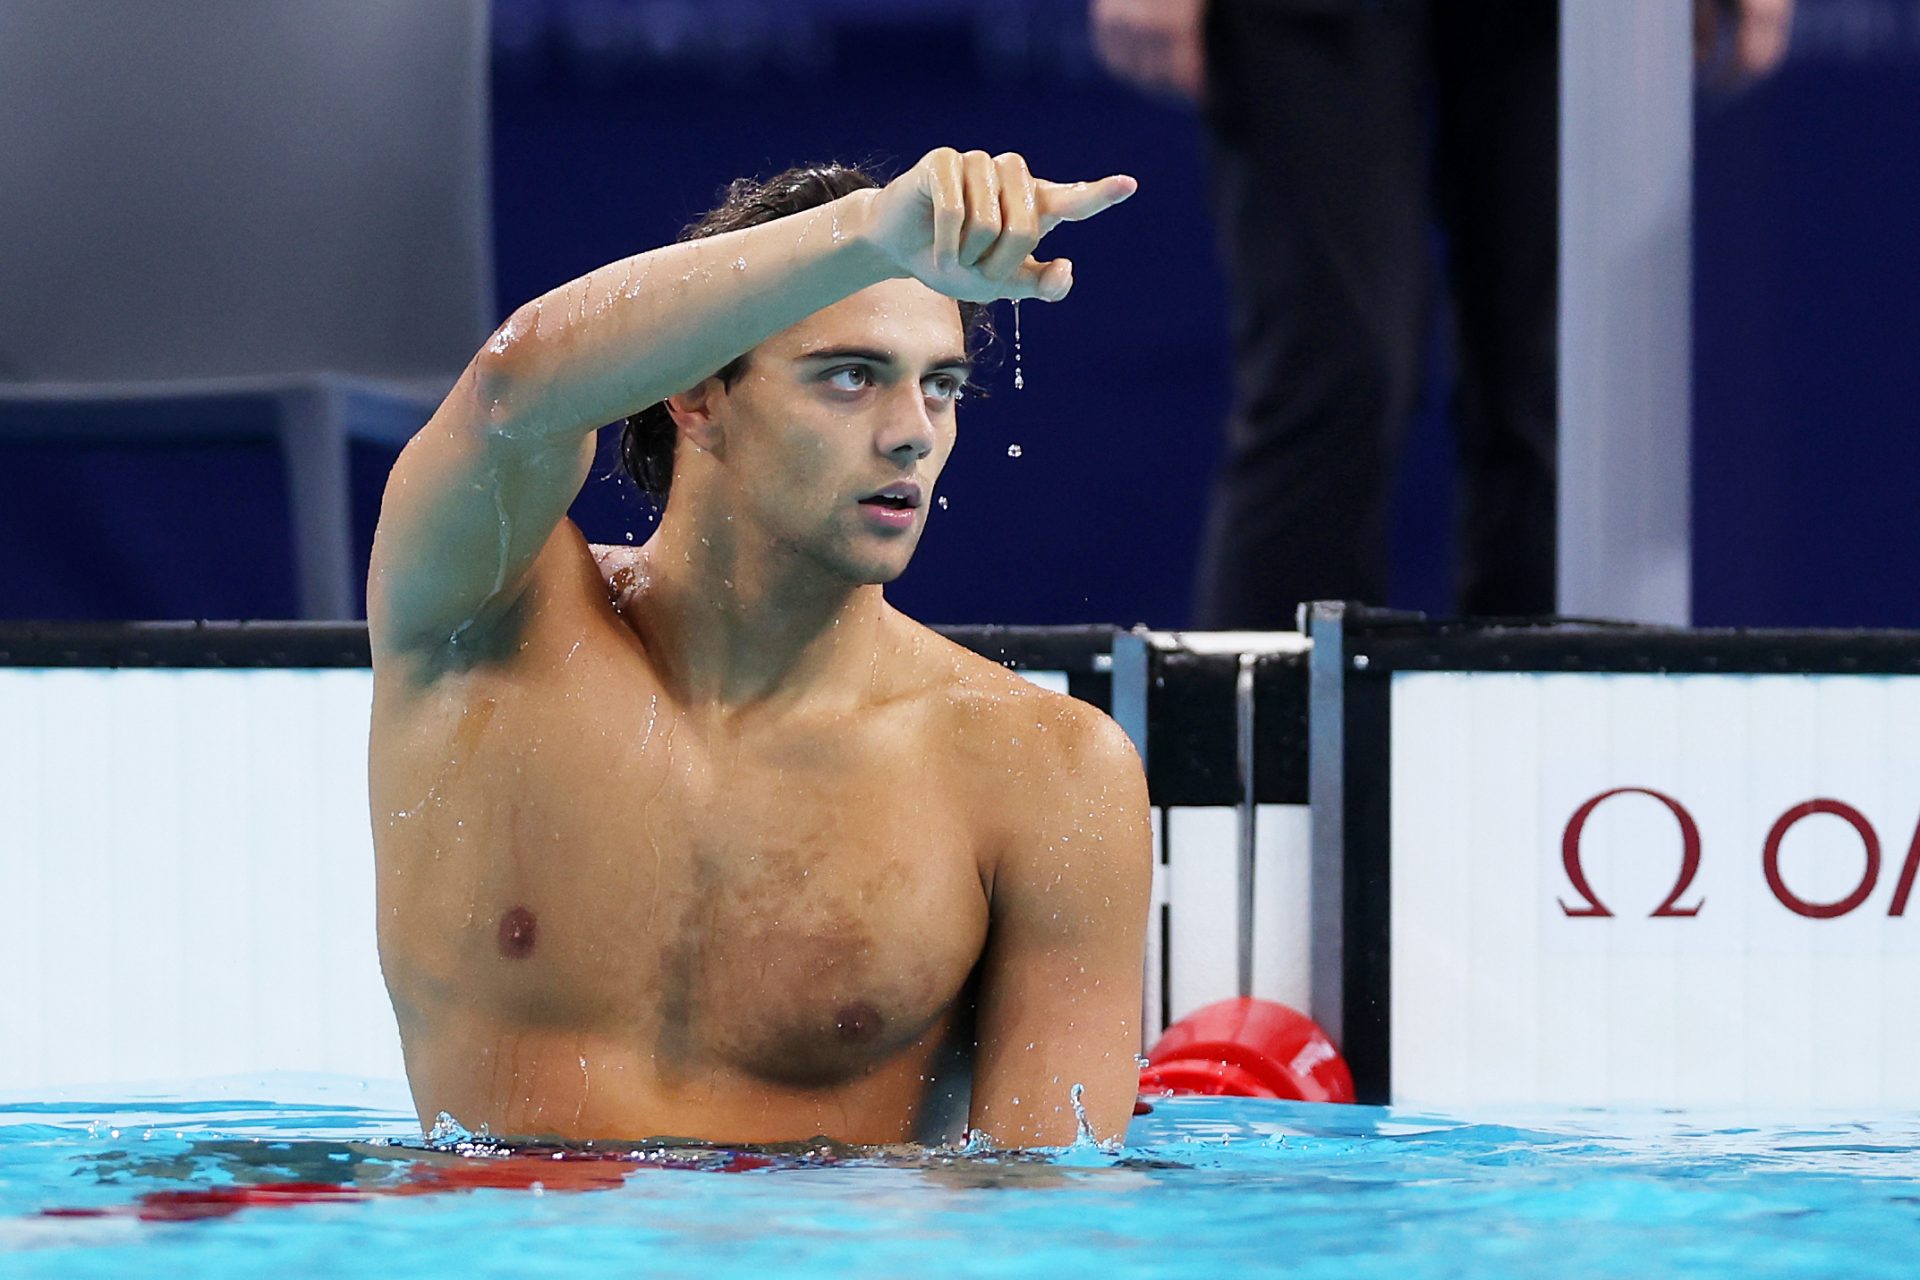 Thomas Ceccon: The Olympic swimmer the internet won't stop talking about